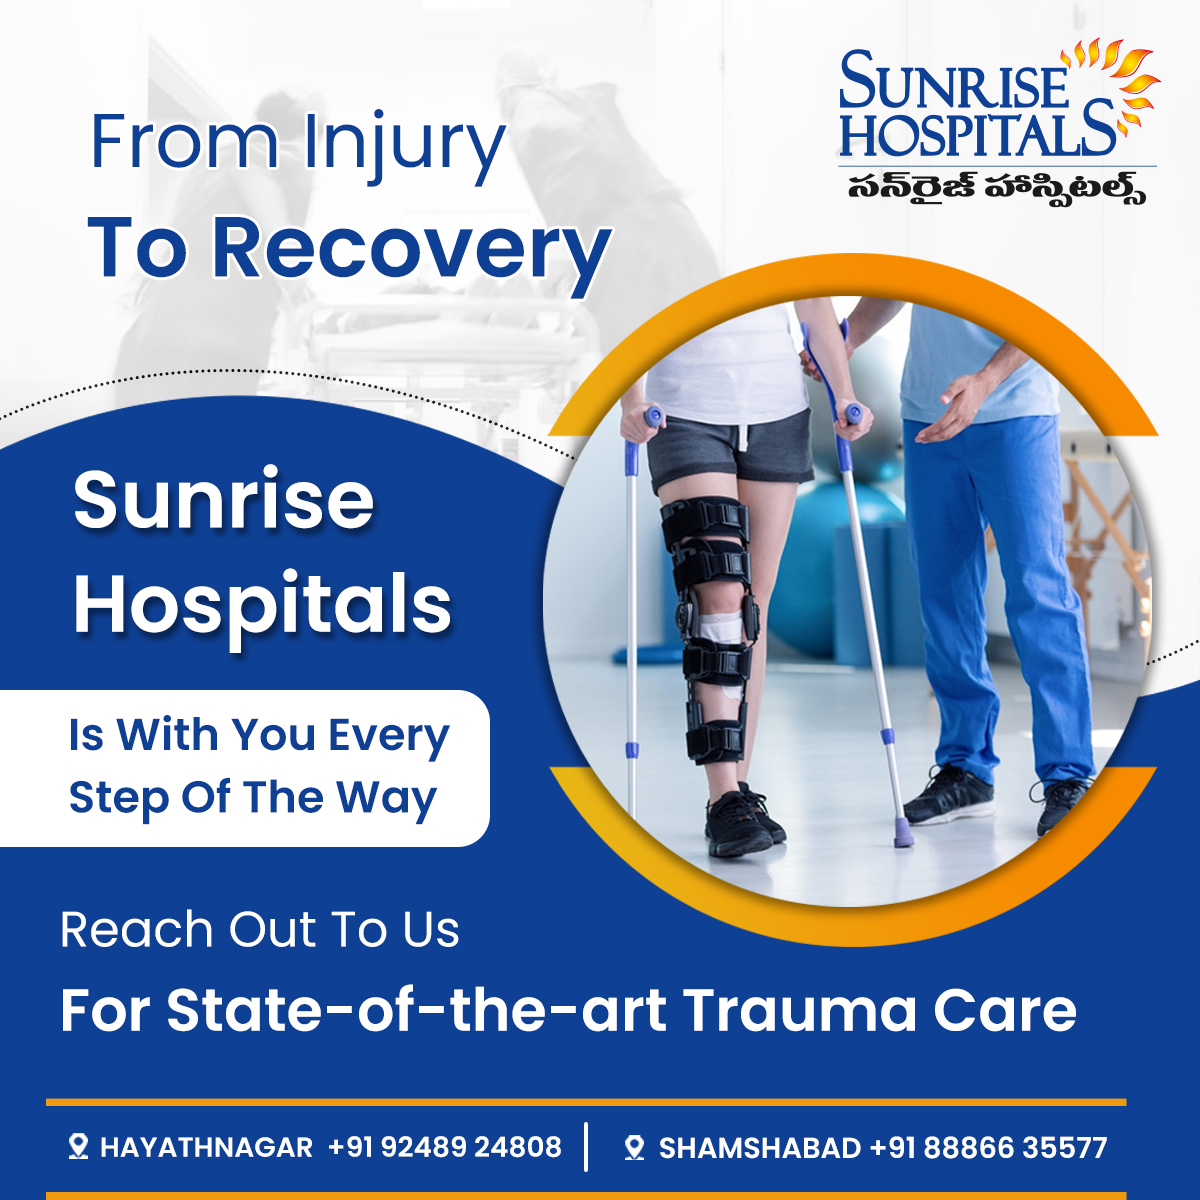 Reach out to us for state-of-the-art trauma care. 

Visit us at : sunrisehospitals.com
Contact us at 8886635577
.
.
.
.
#Sunrise #SunriseHospitals  #treatment #besthospitals #neuro  #allhealth #care